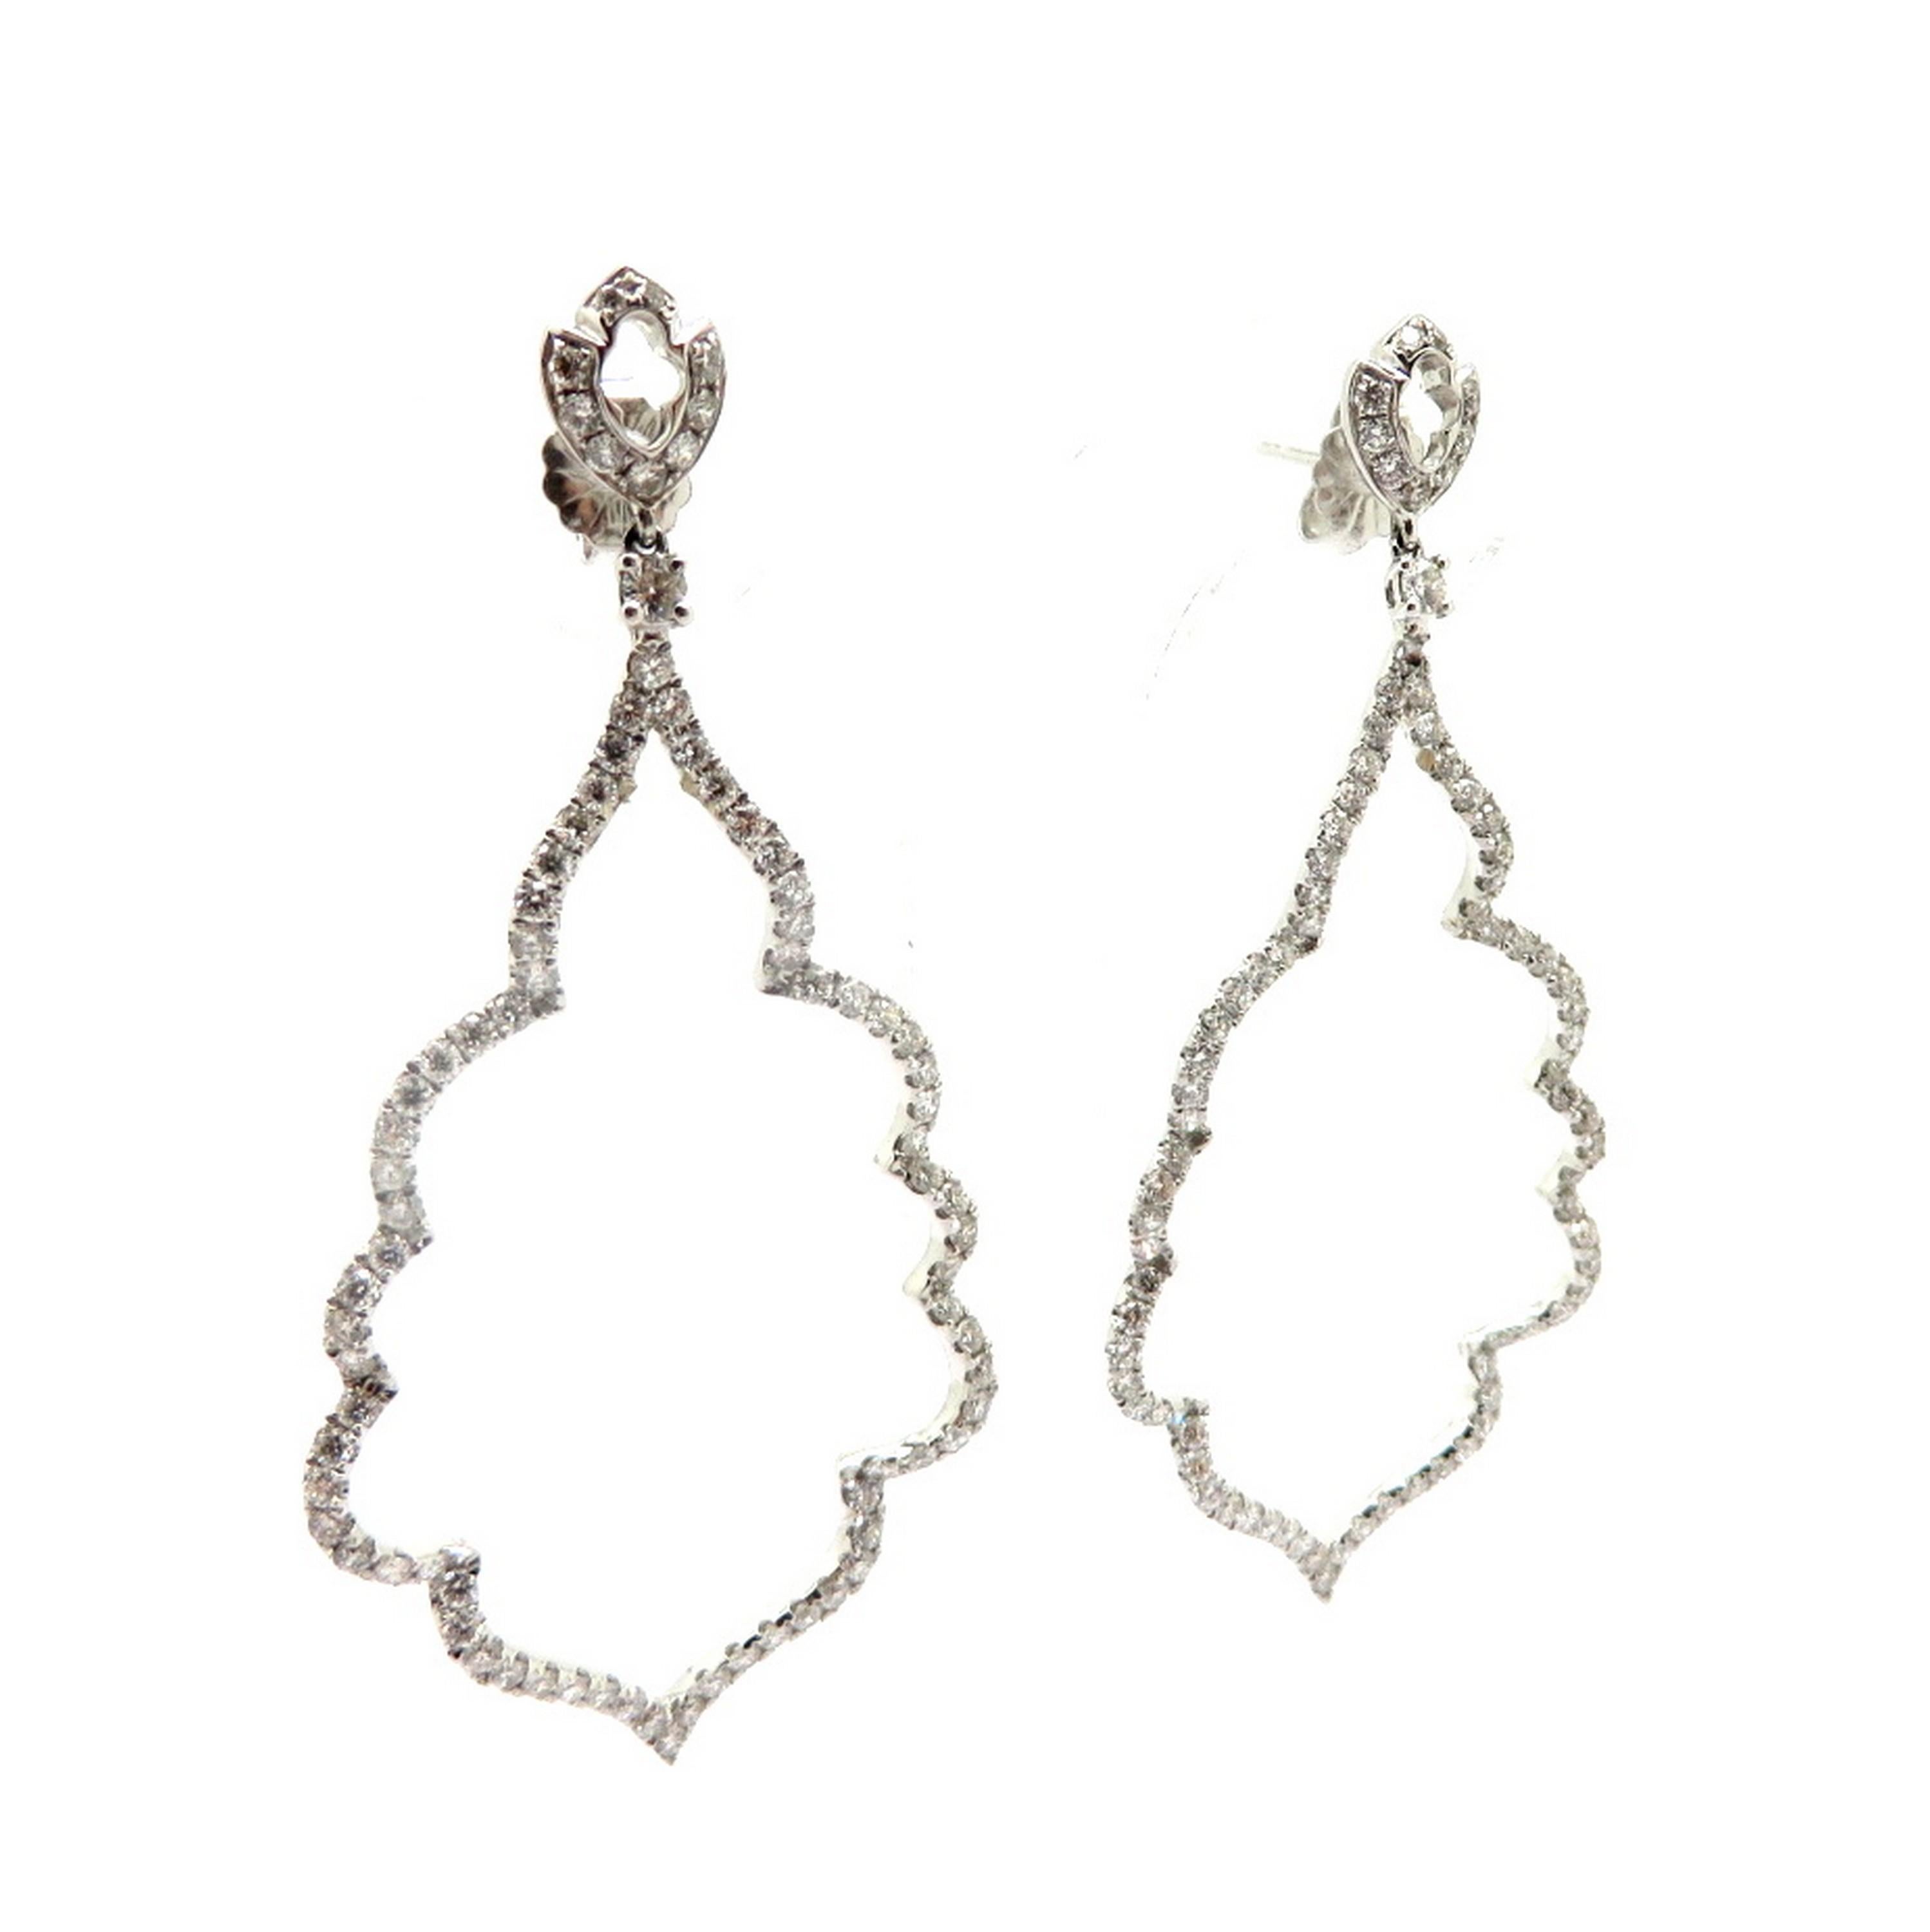 Estate 18K white gold round diamond dangle fashion statement earrings. Showcasing 135 round brilliant cut bead set diamonds weighing a combined total of approximately 1.32 carats. Diamond grading: color grade: G – H. Clarity grade: VS1. The earrings